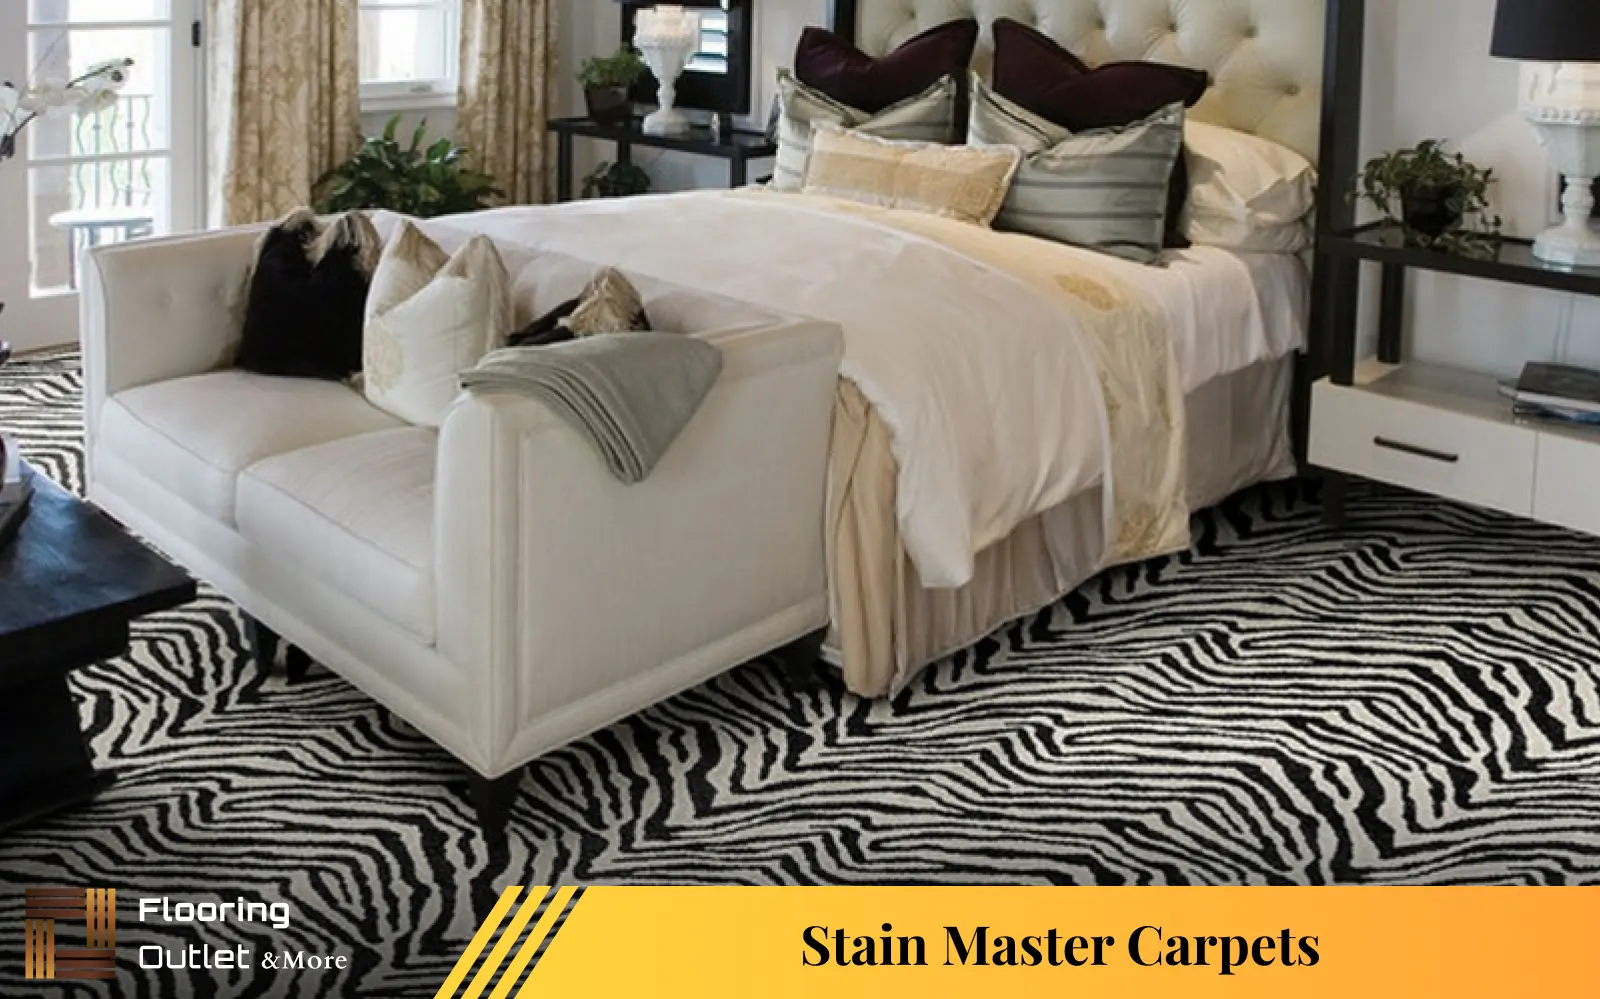 Stain Master carpets